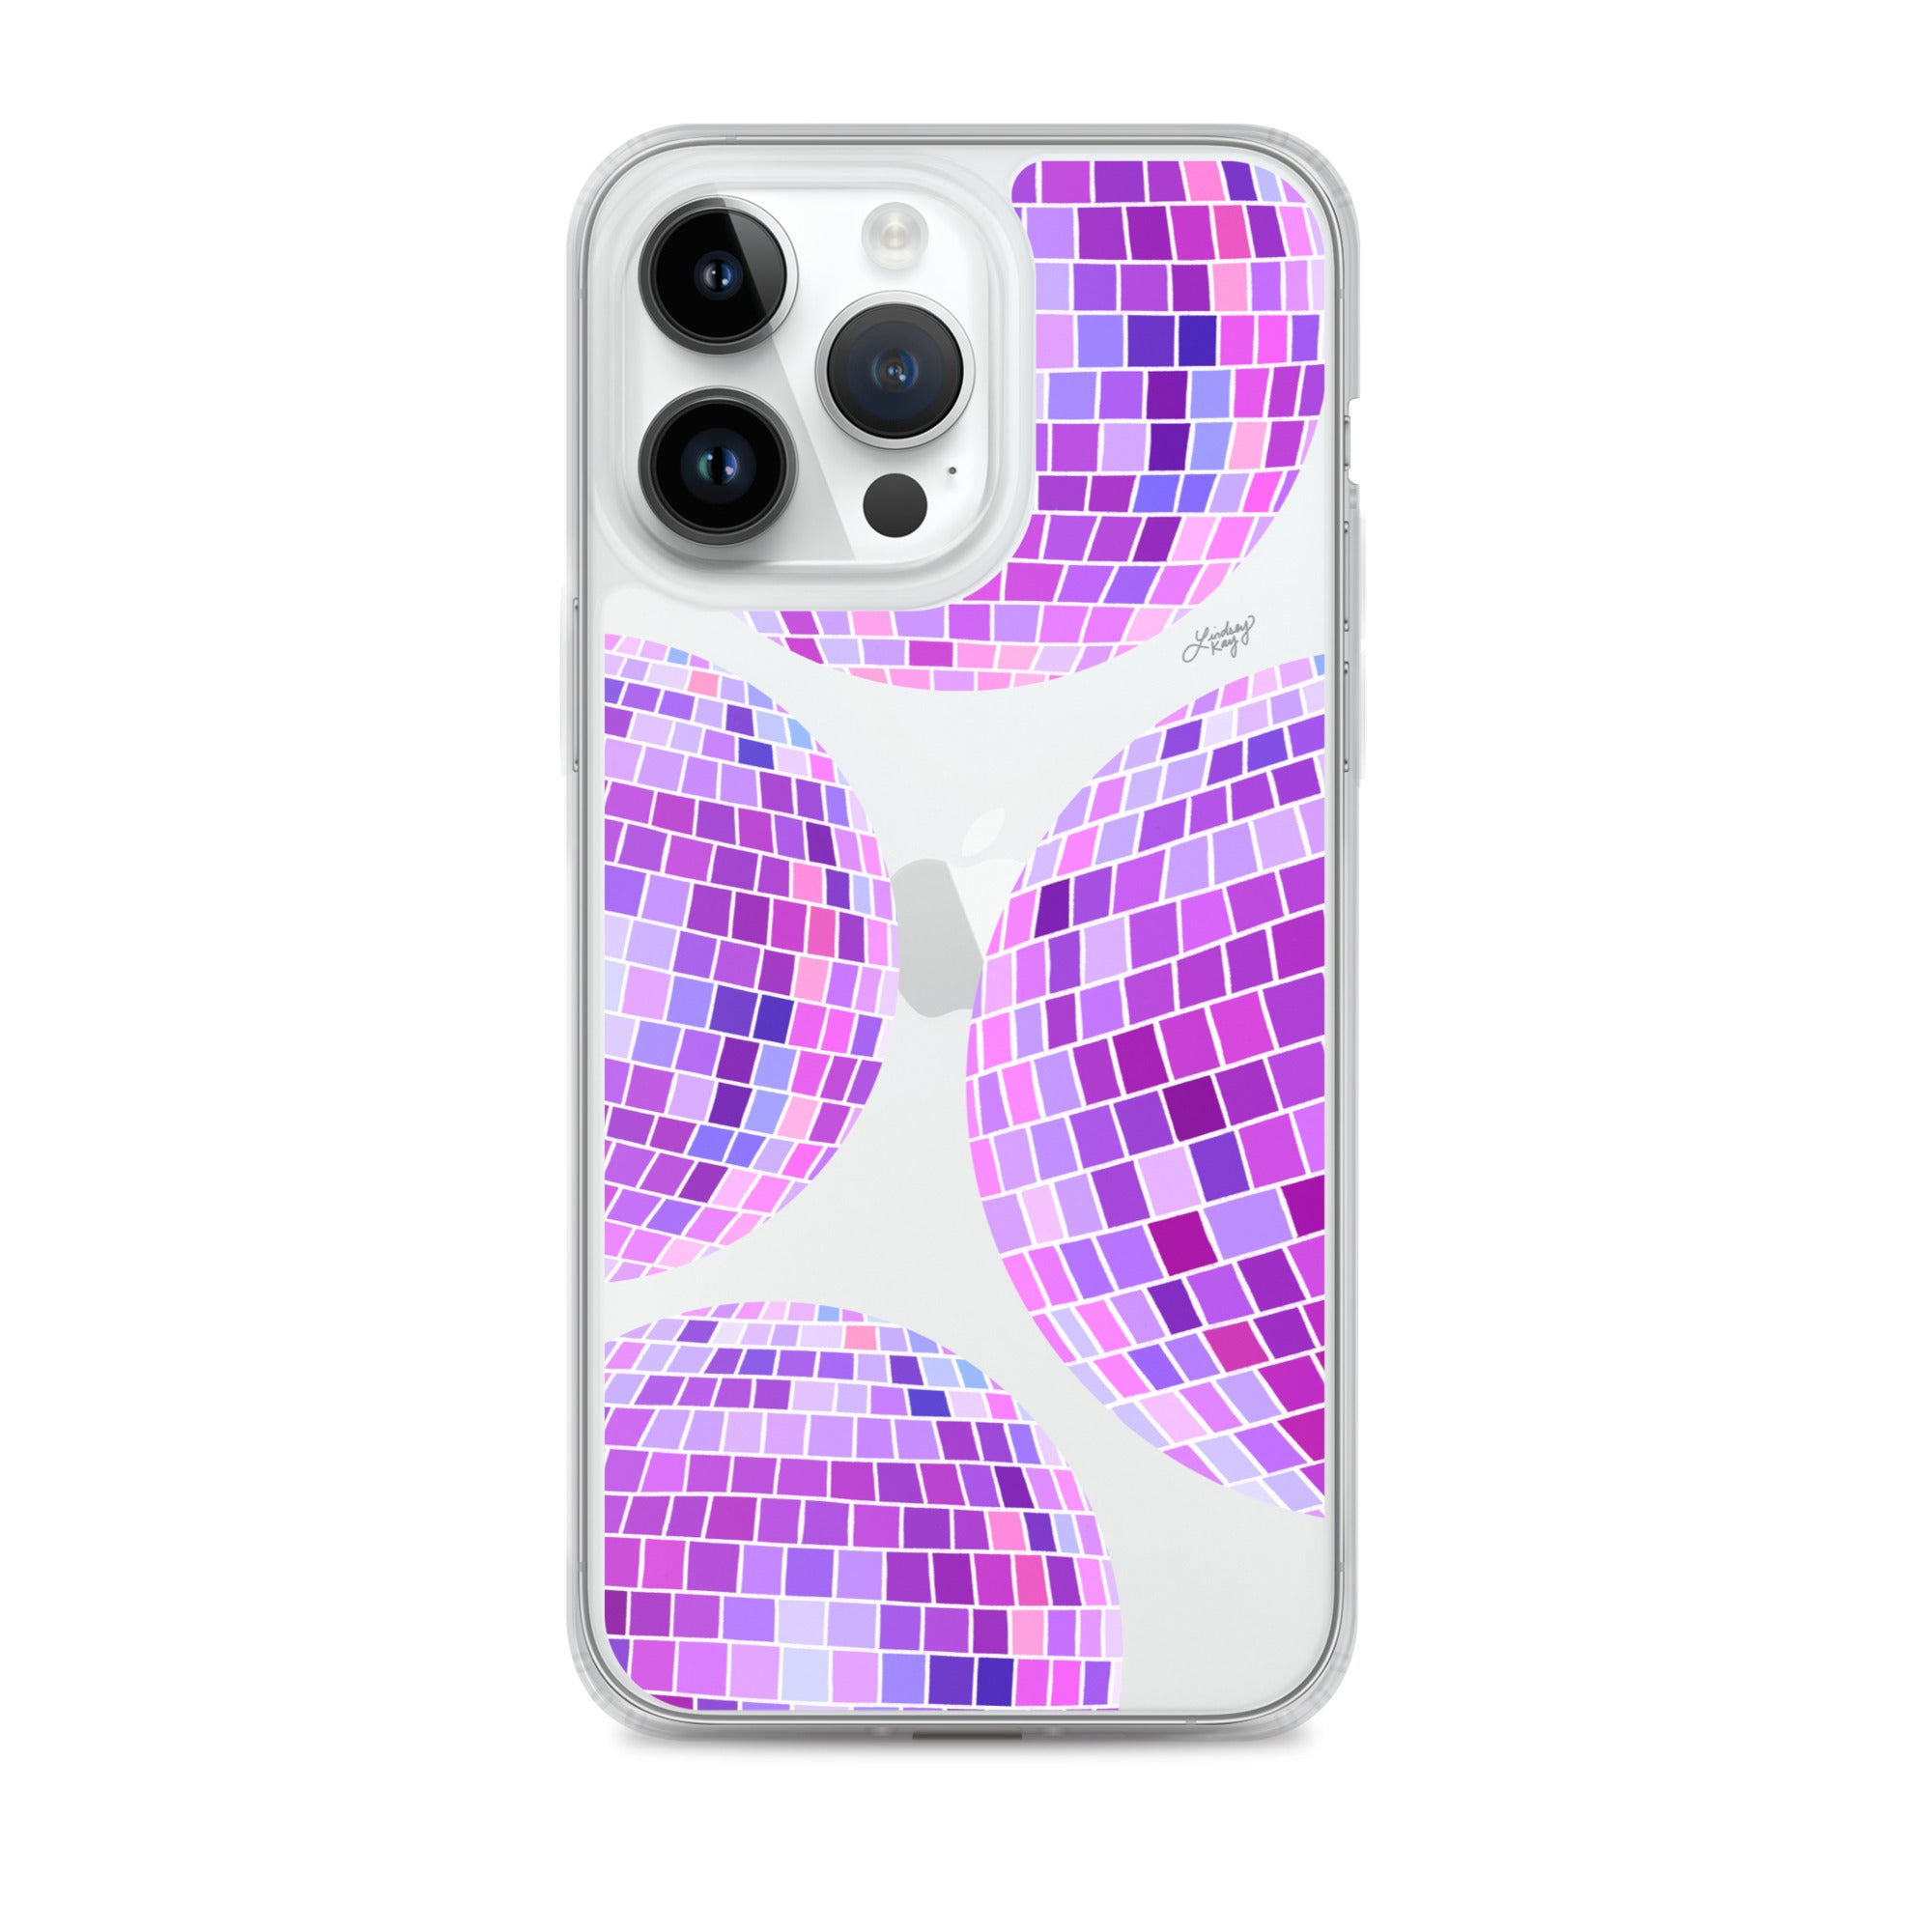 purple disco ball illustration design retro iphone phone case clear colorful trendy lindsey kay collective